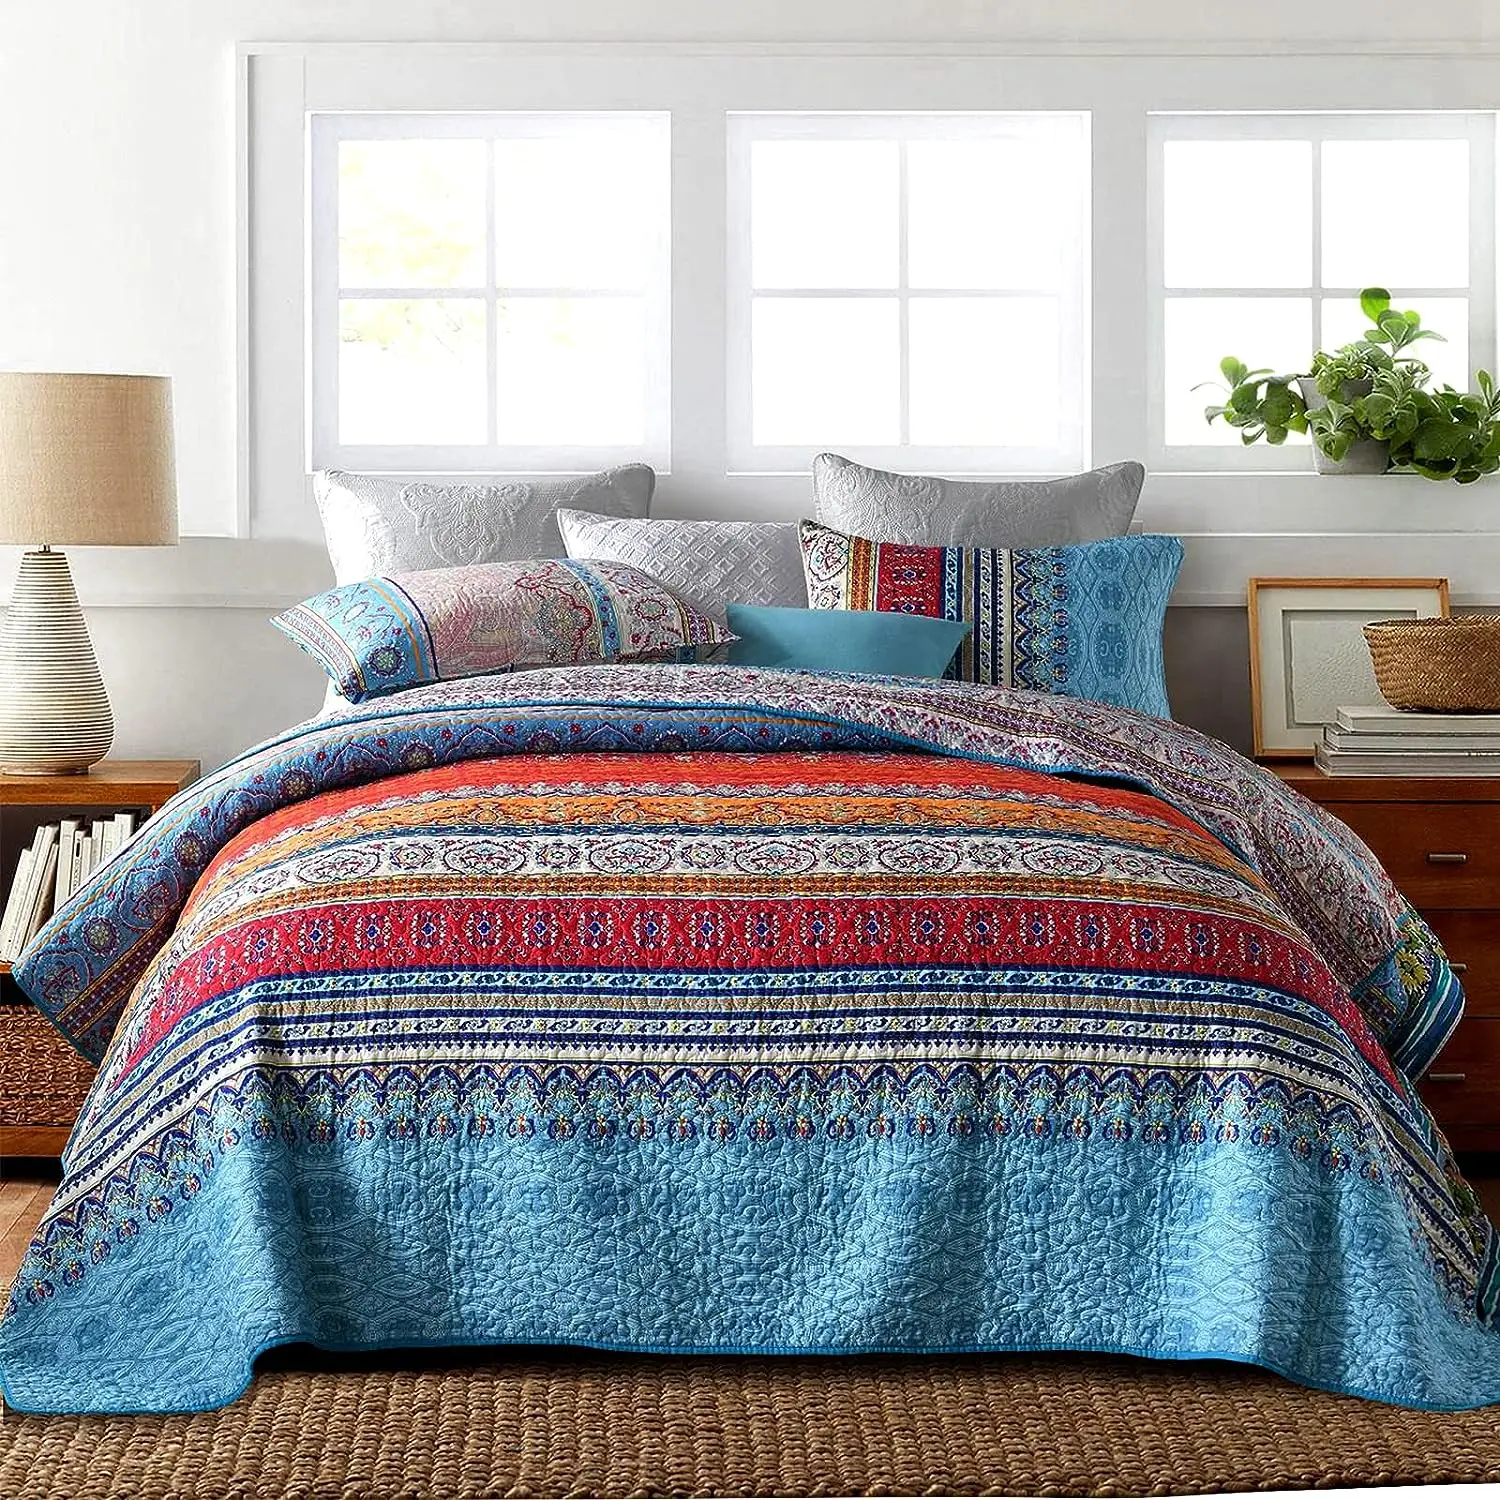 

Bohemian Queen Quilt 3 Piece Soft Microfiber Ethnic Style Boho Red and Blue Quilted Throw Bedspreads Reversible Boho Quilt